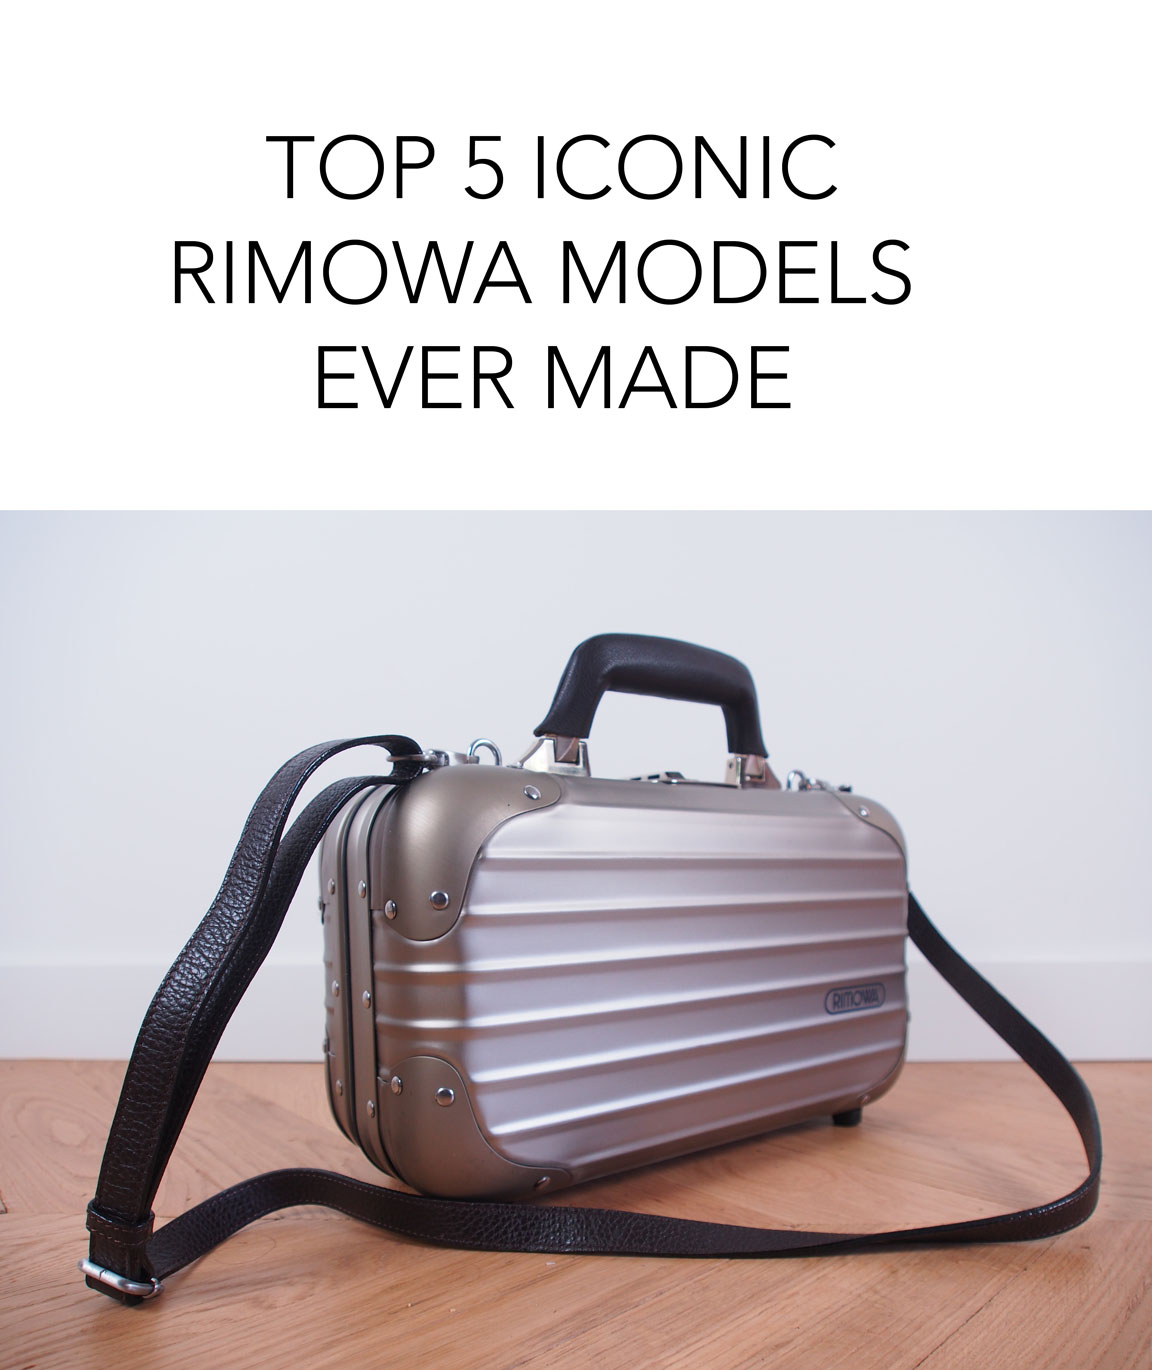 rimowa beauty case discontinued